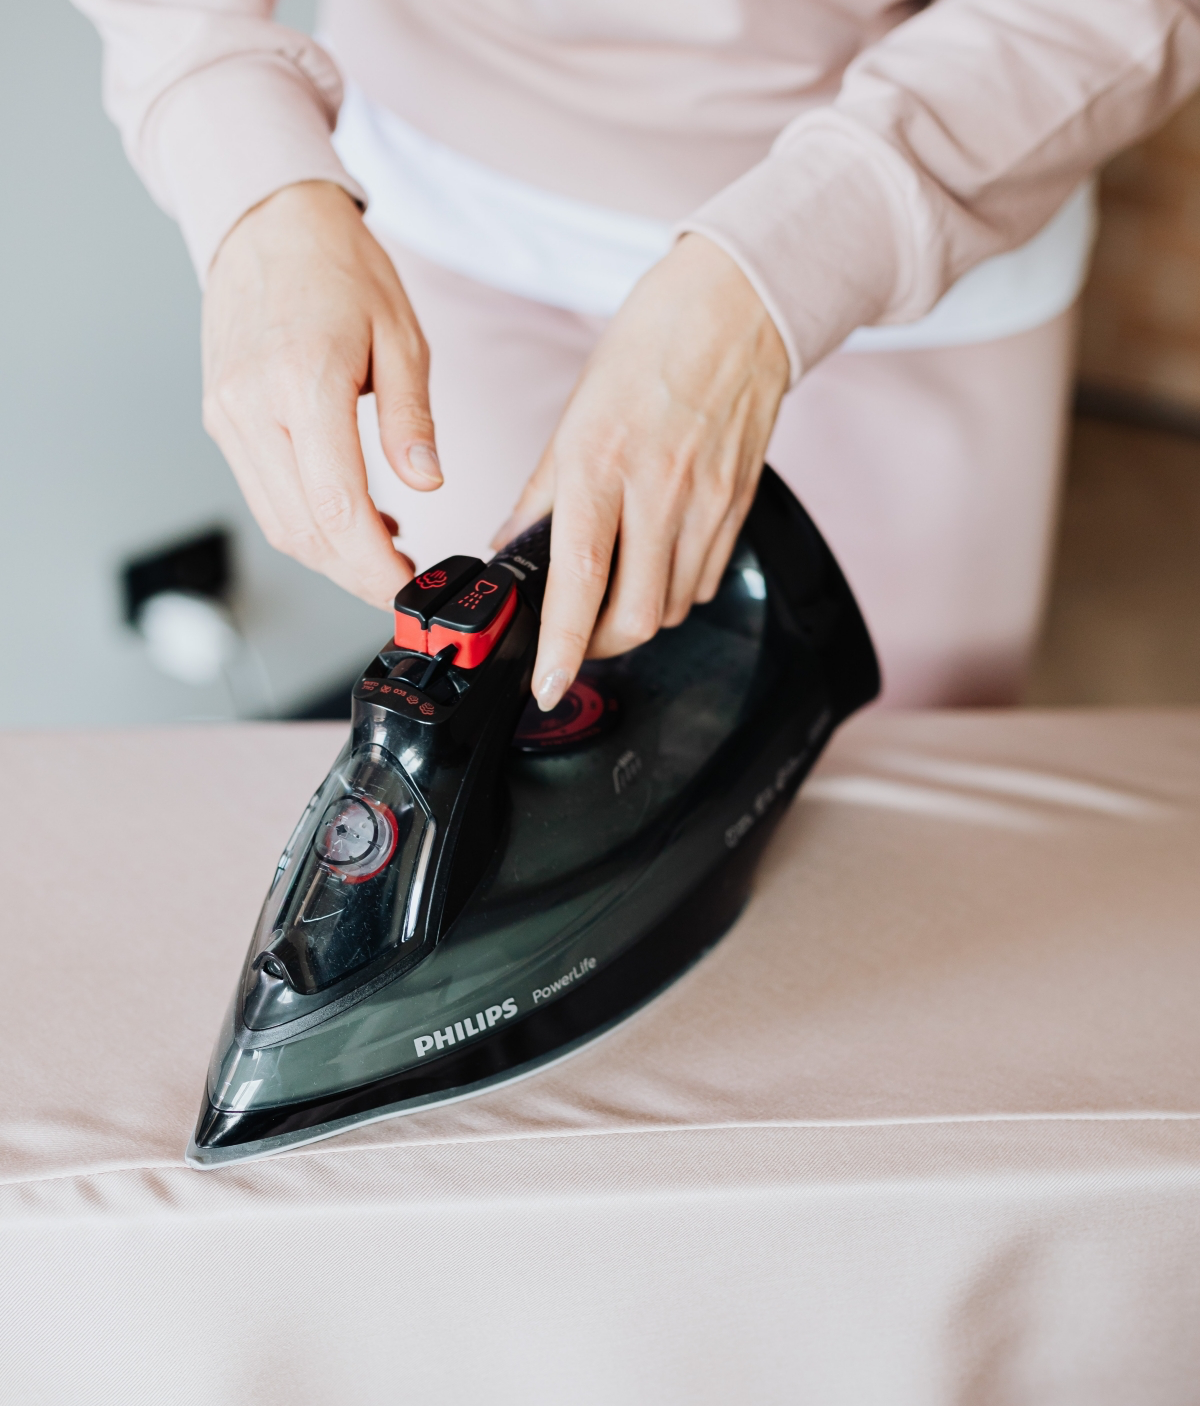 how to save electricity when ironing clothes